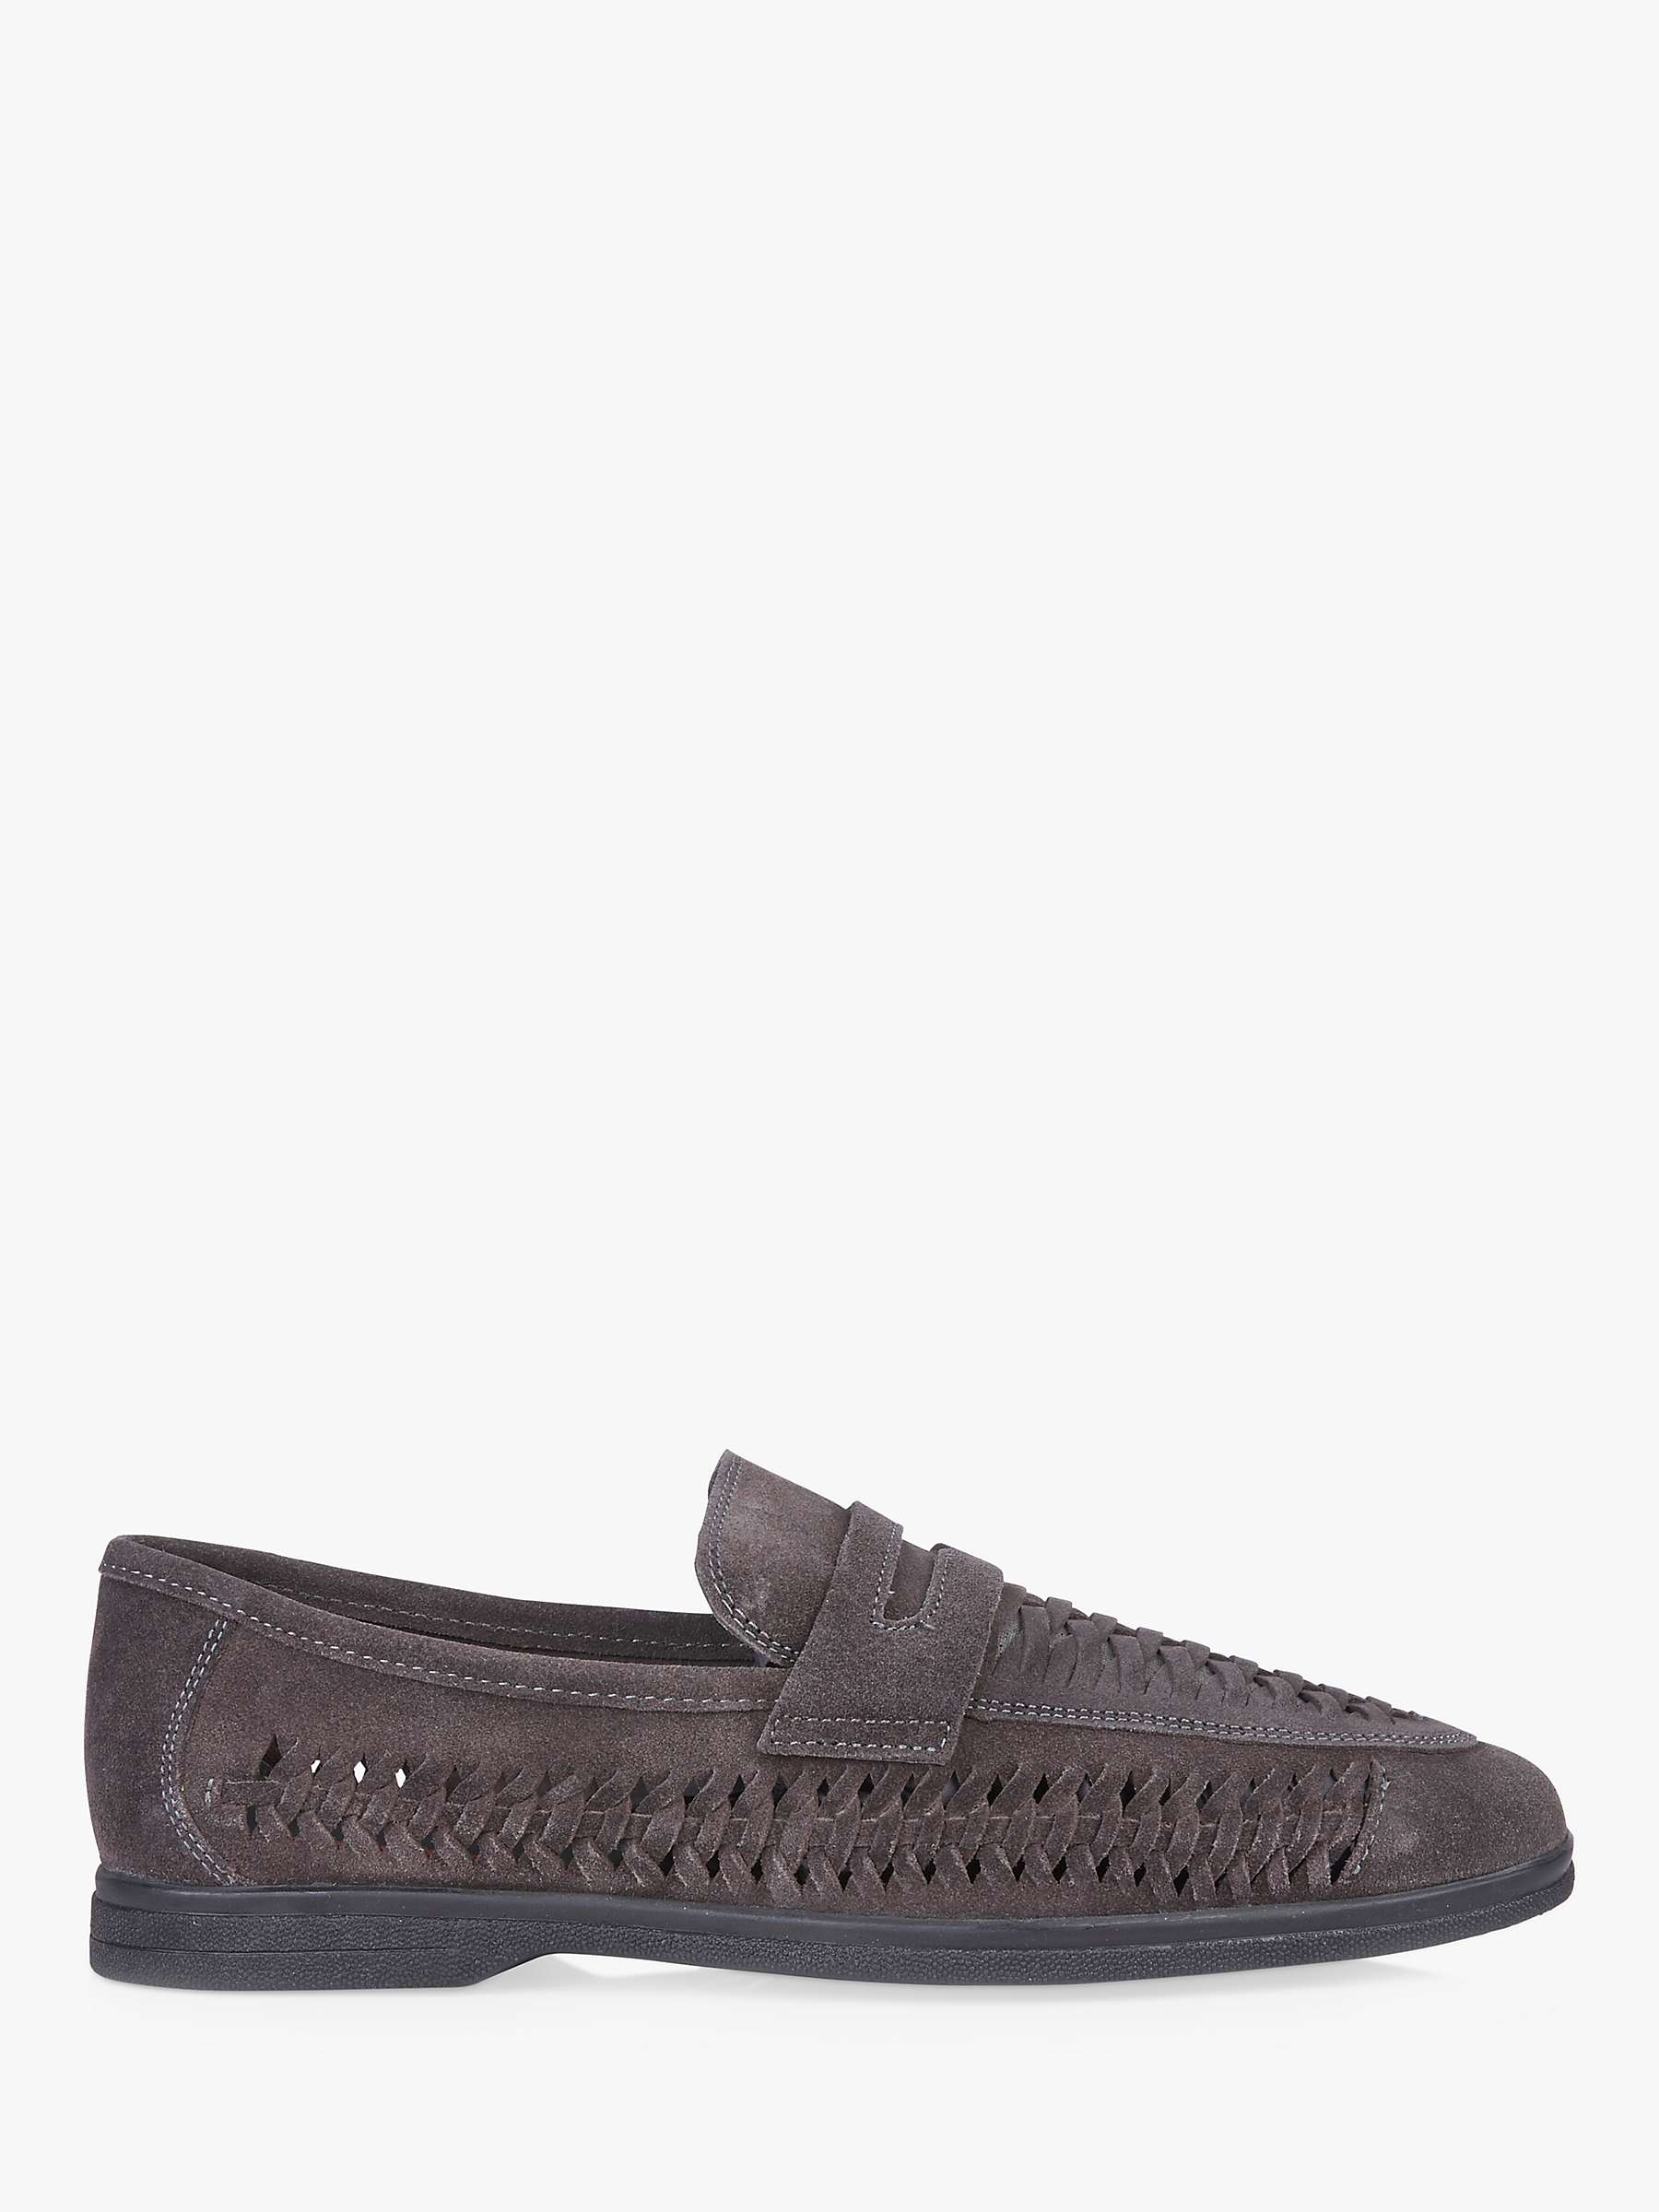 Buy Silver Street London Perth Suede Loafers Online at johnlewis.com